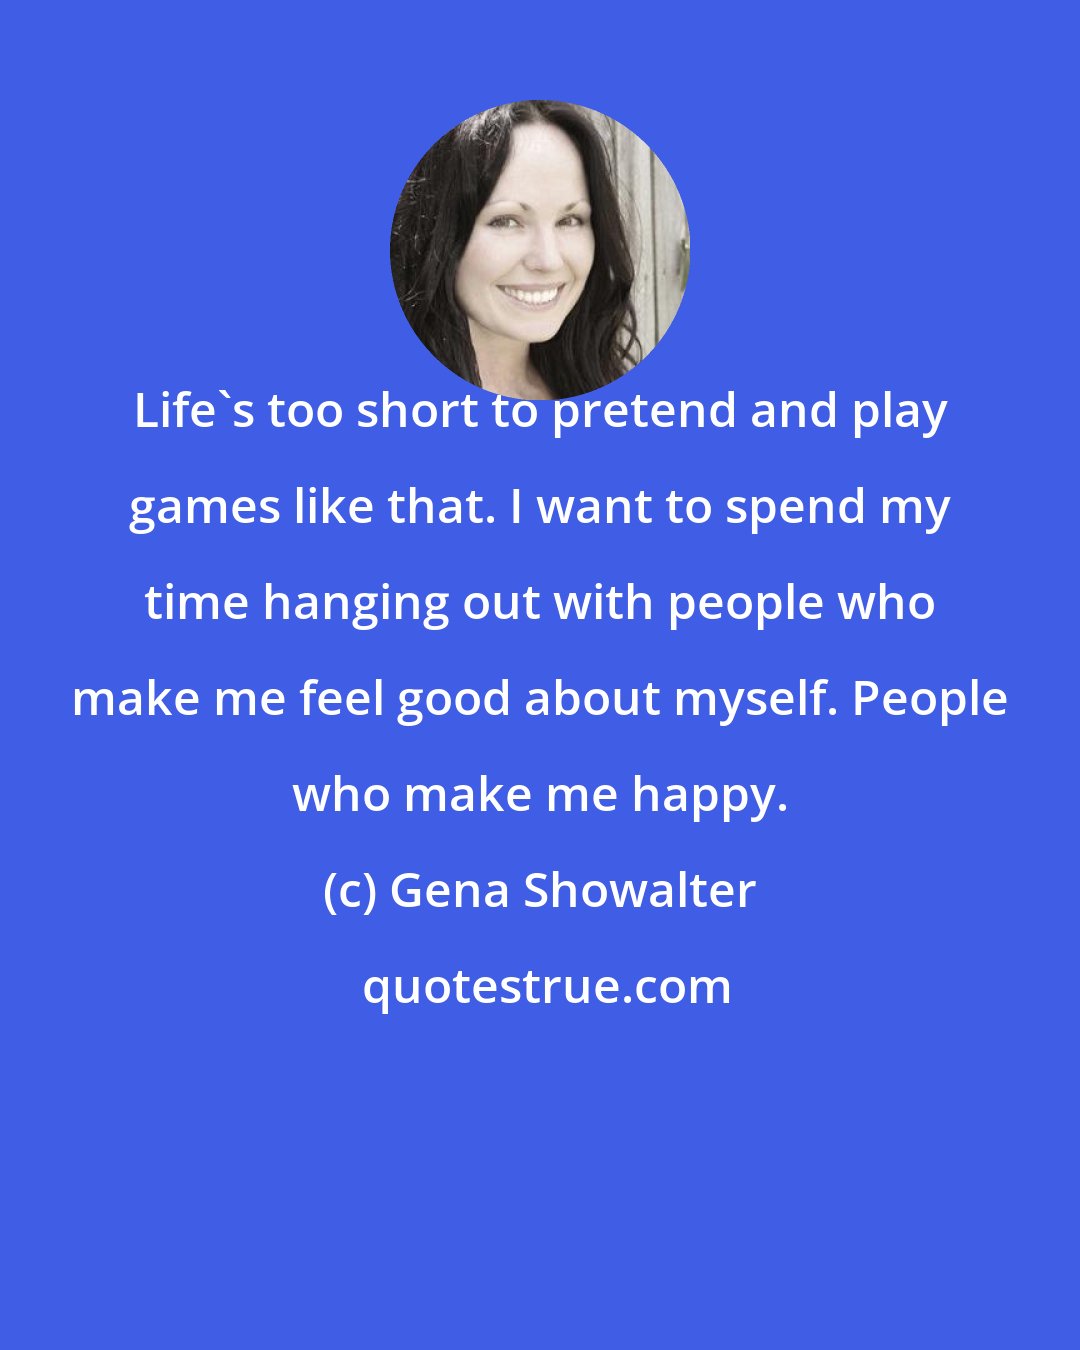 Gena Showalter: Life's too short to pretend and play games like that. I want to spend my time hanging out with people who make me feel good about myself. People who make me happy.